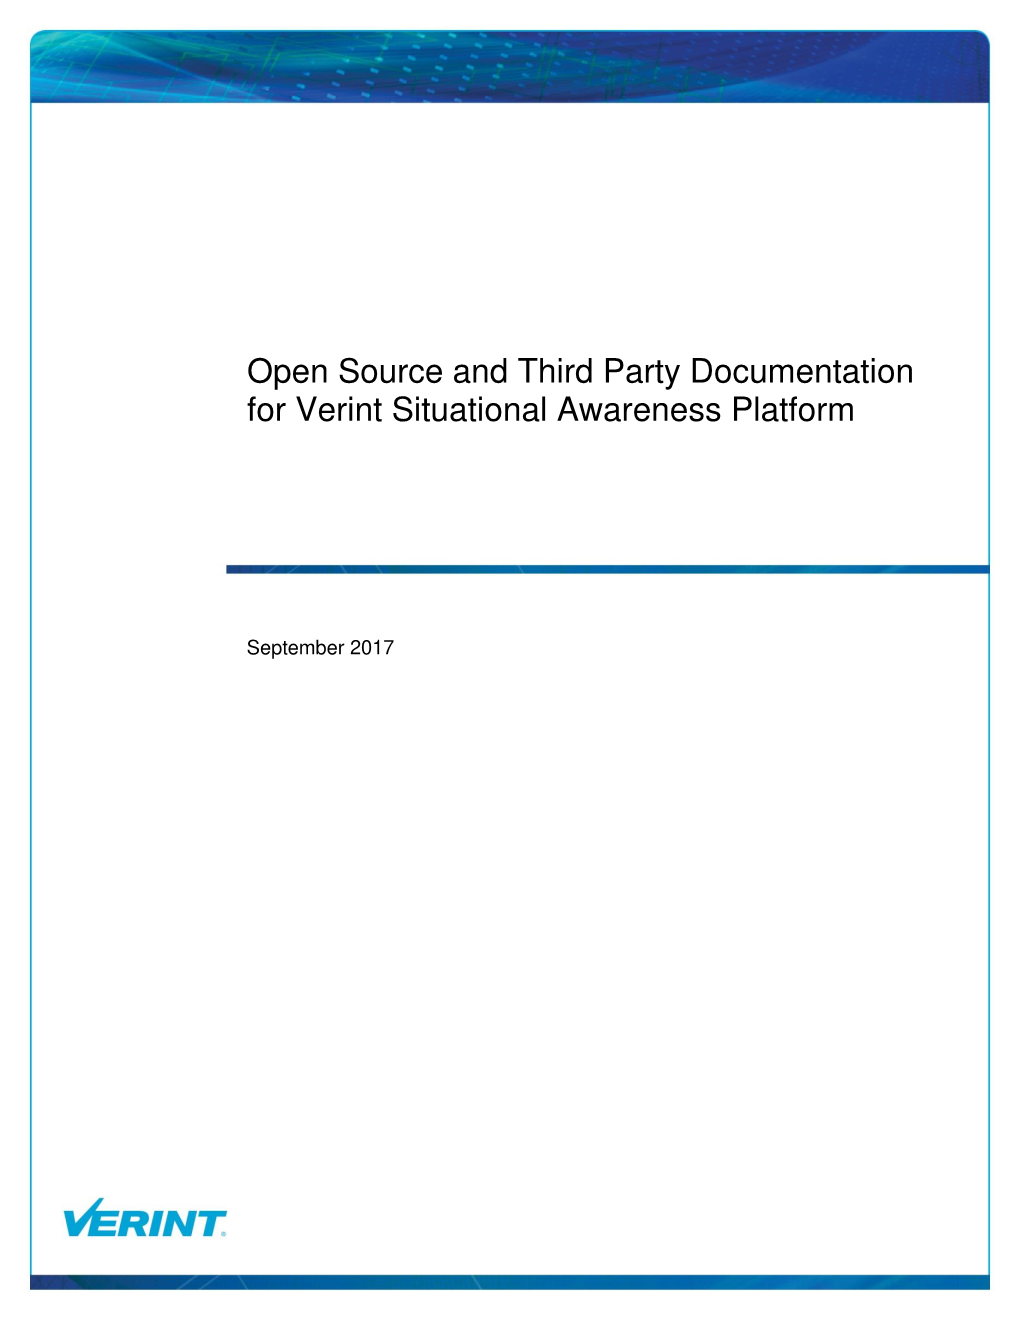 Open Source and Third Party Documentation for Verint Situational Awareness Platform